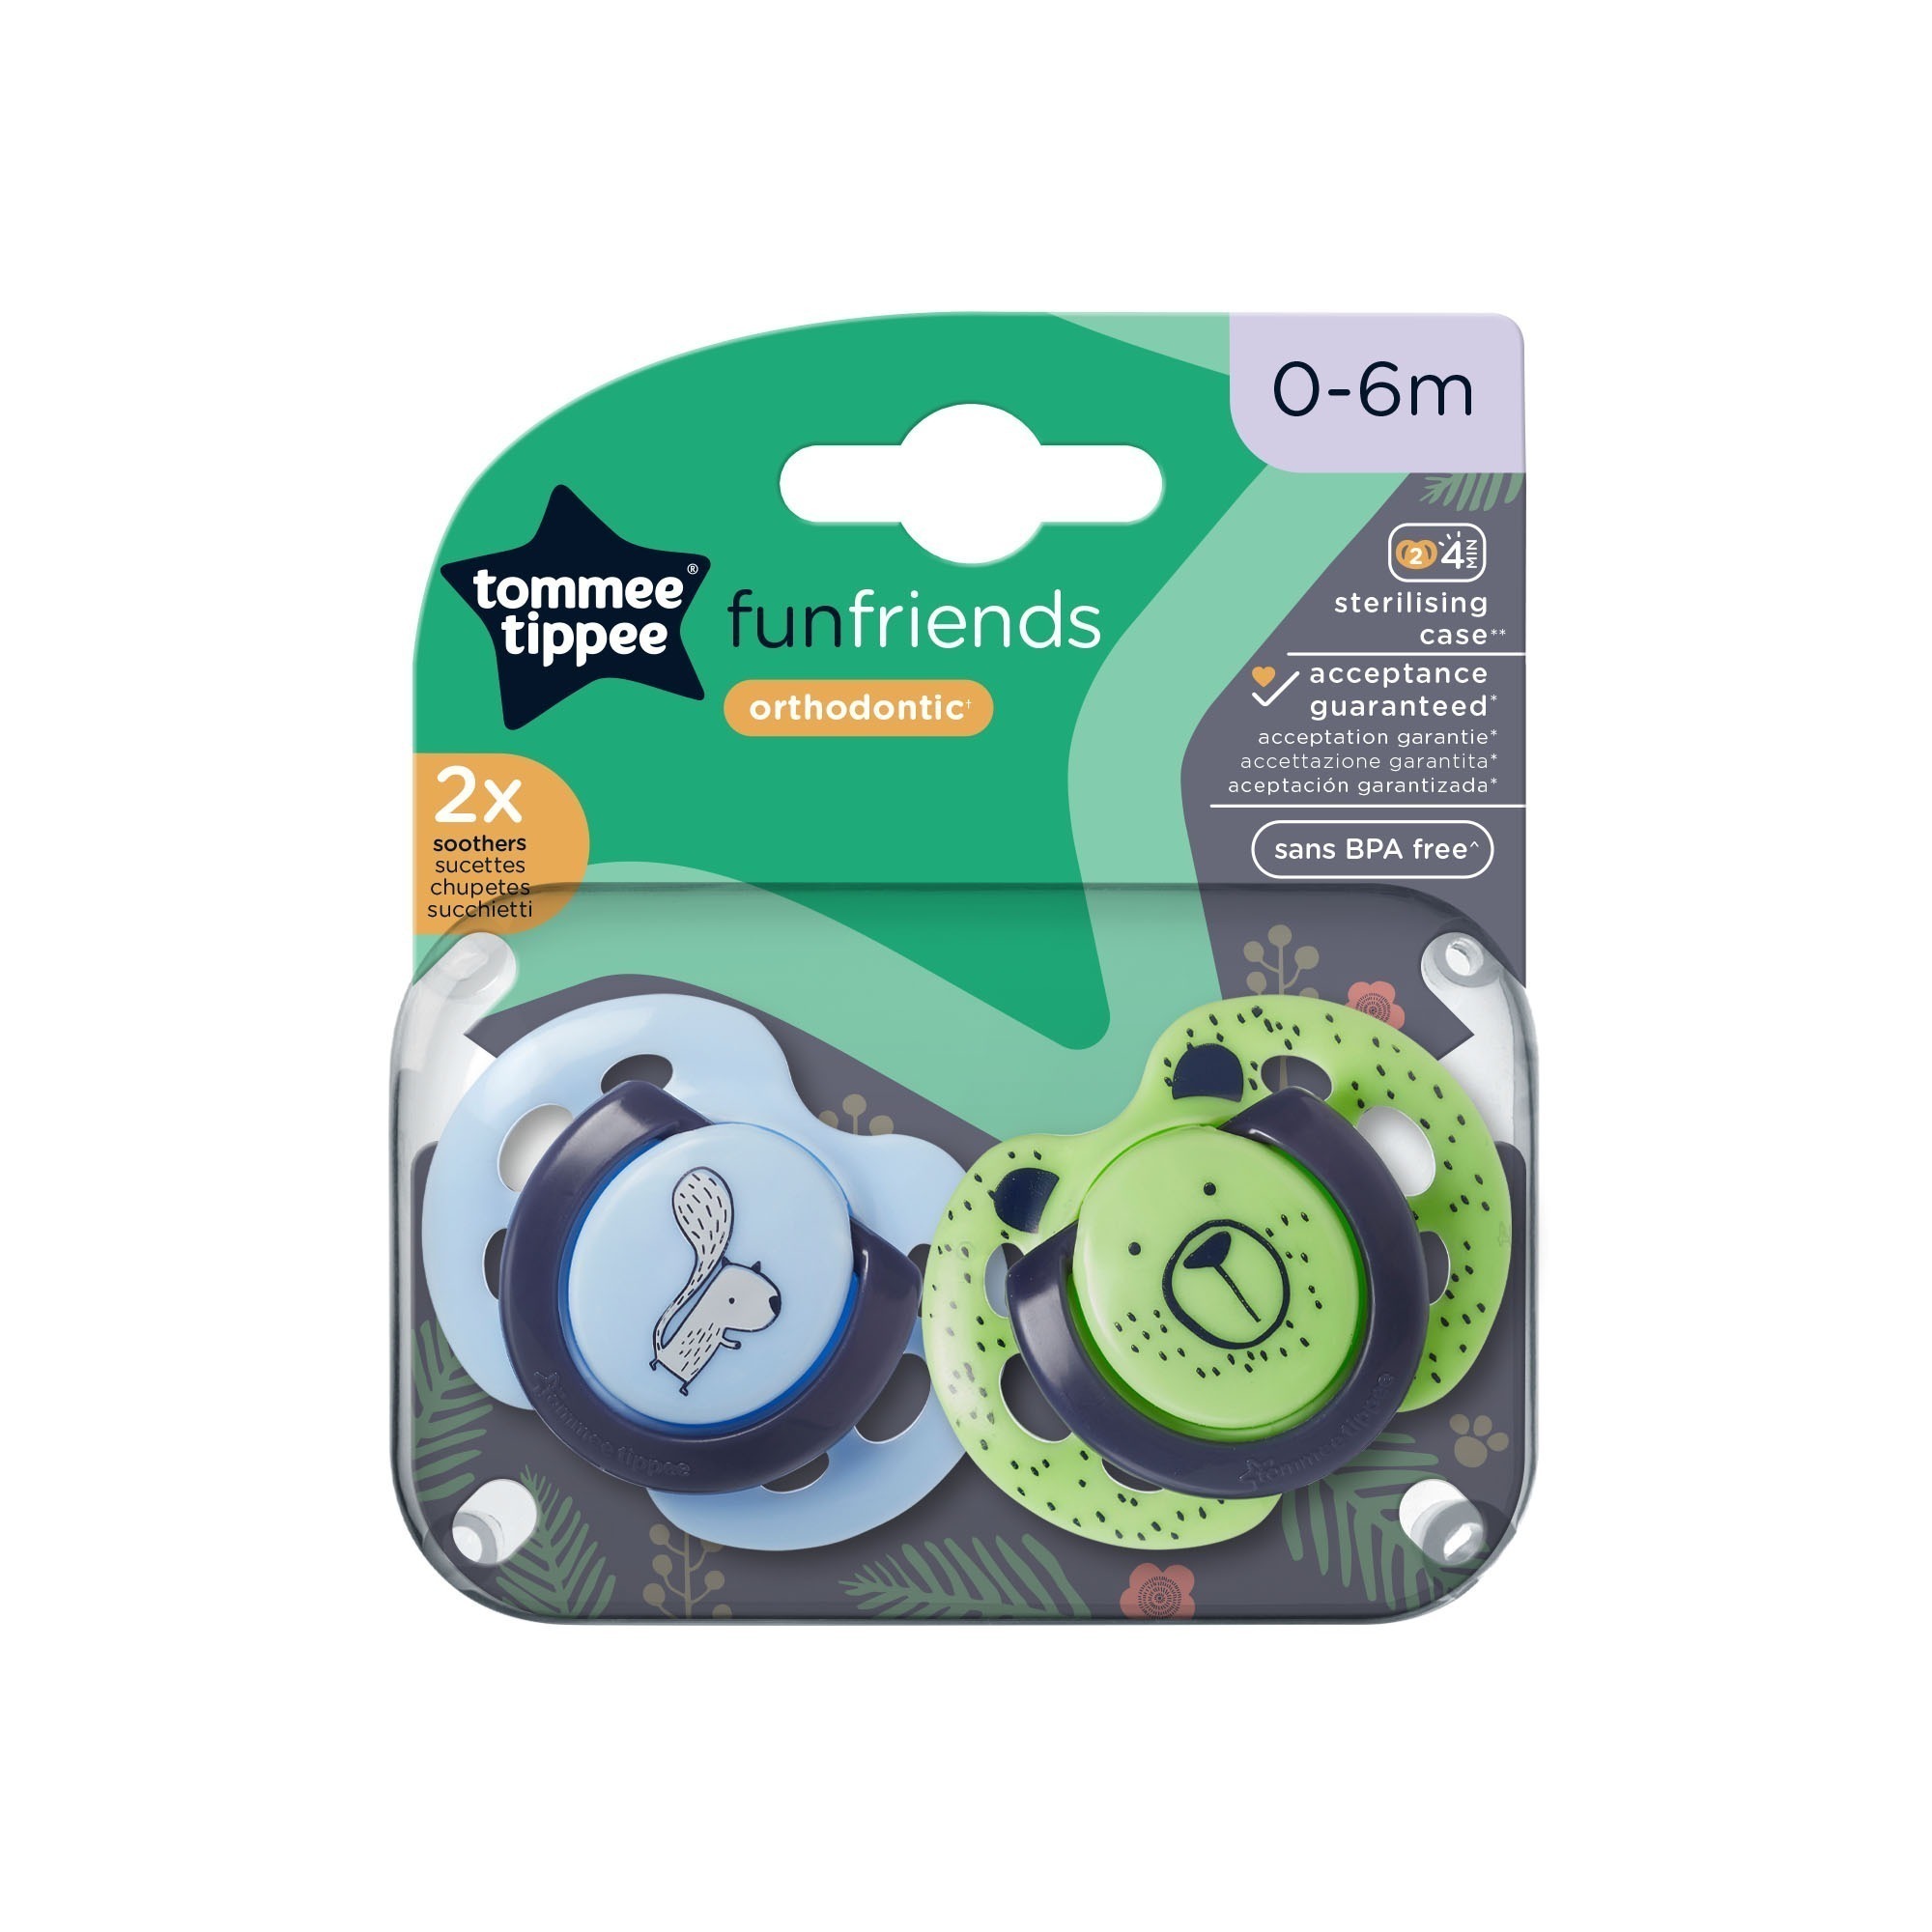 Tommee-tippee Chupete Fun Style 0-6m 2uds